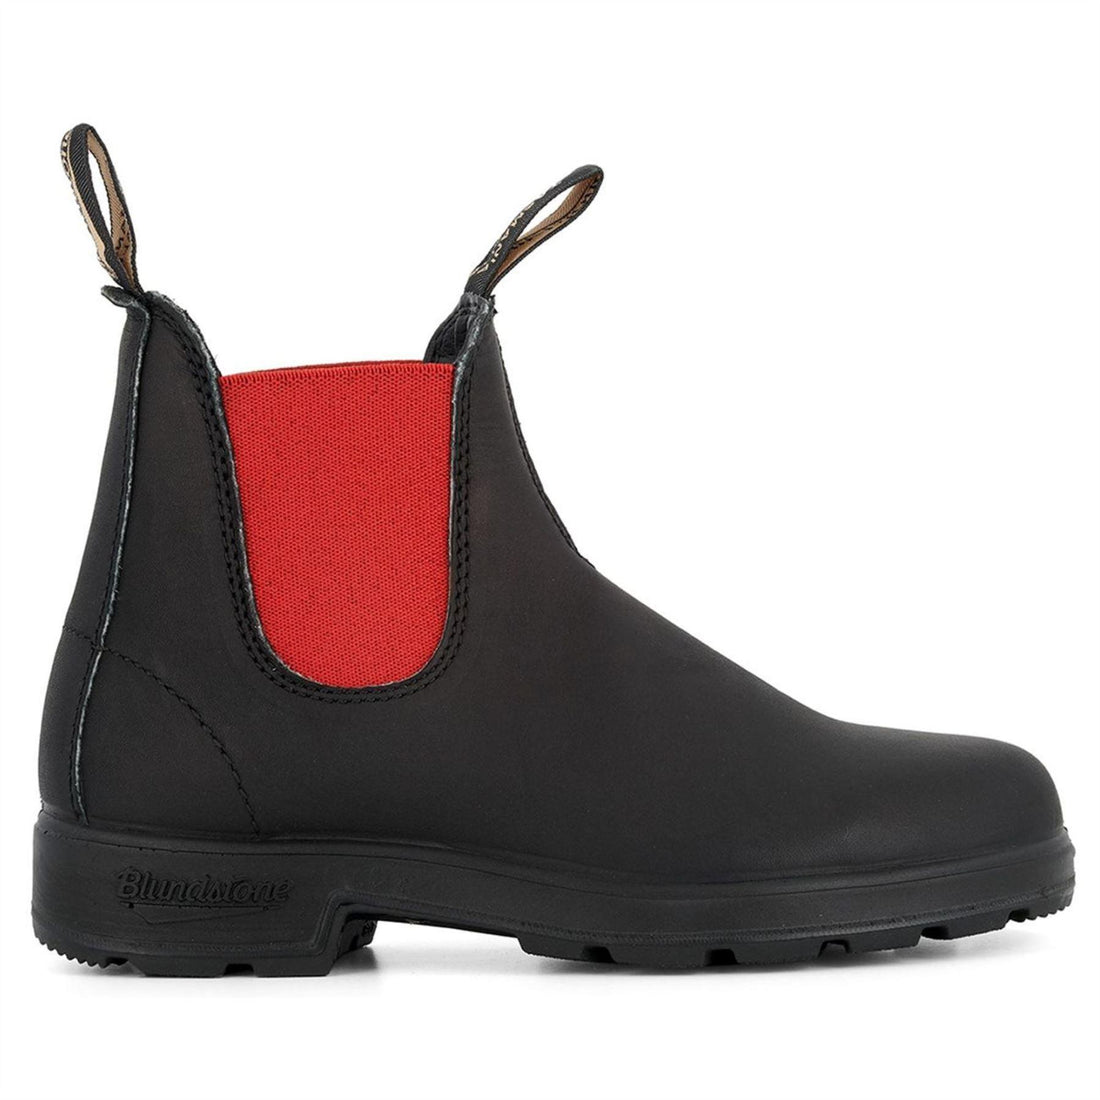 Blundstone 508 Black Red Leather Chelsea Boots Slip On Casual - Knighthood Store